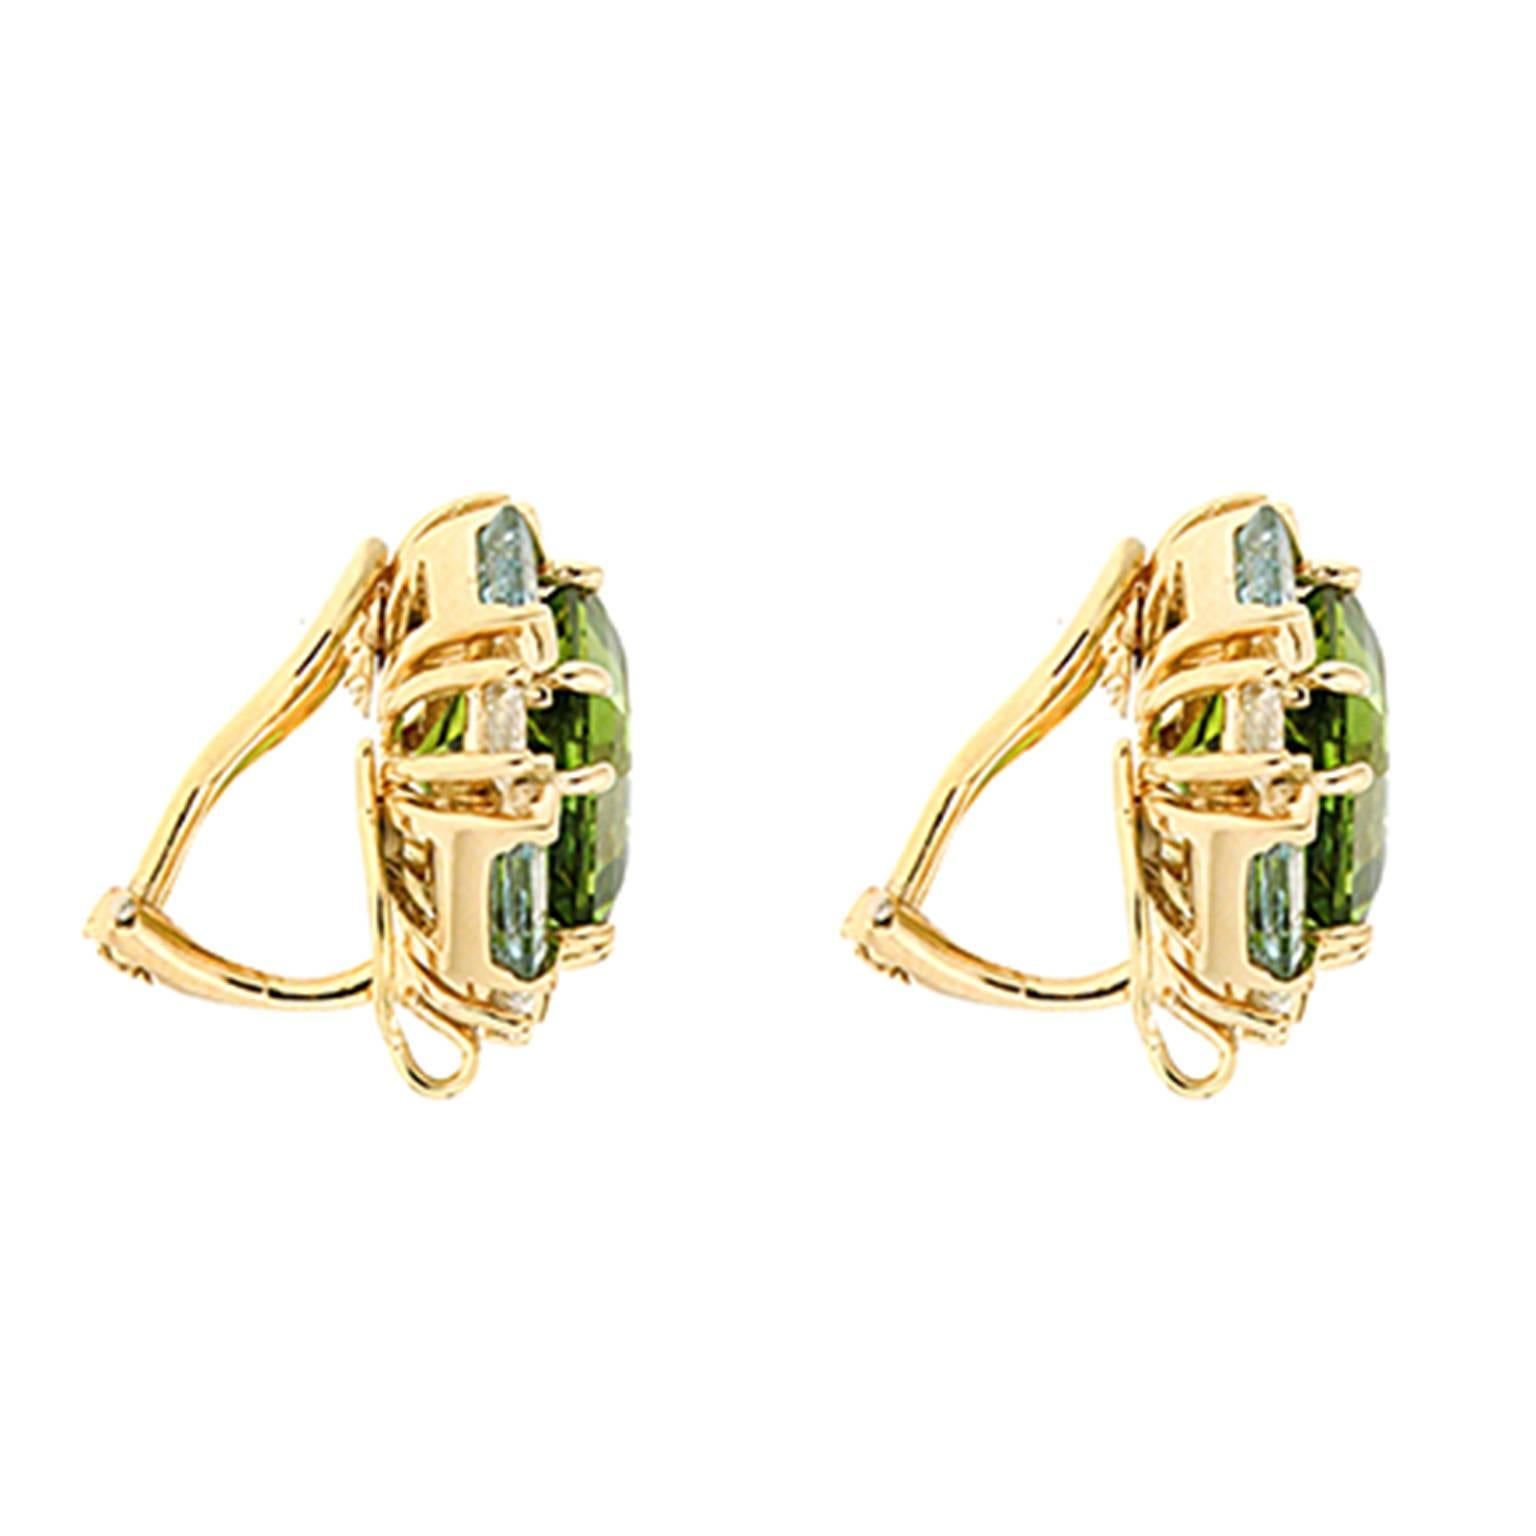 This lovely pair of earrings features expert selected special cut Octagon Peridot with Emerald Cut Aquamarines and Round brilliant diamonds. The earrings are completed in 18kt yellow gold with clip backs. Posts can be added upon request.